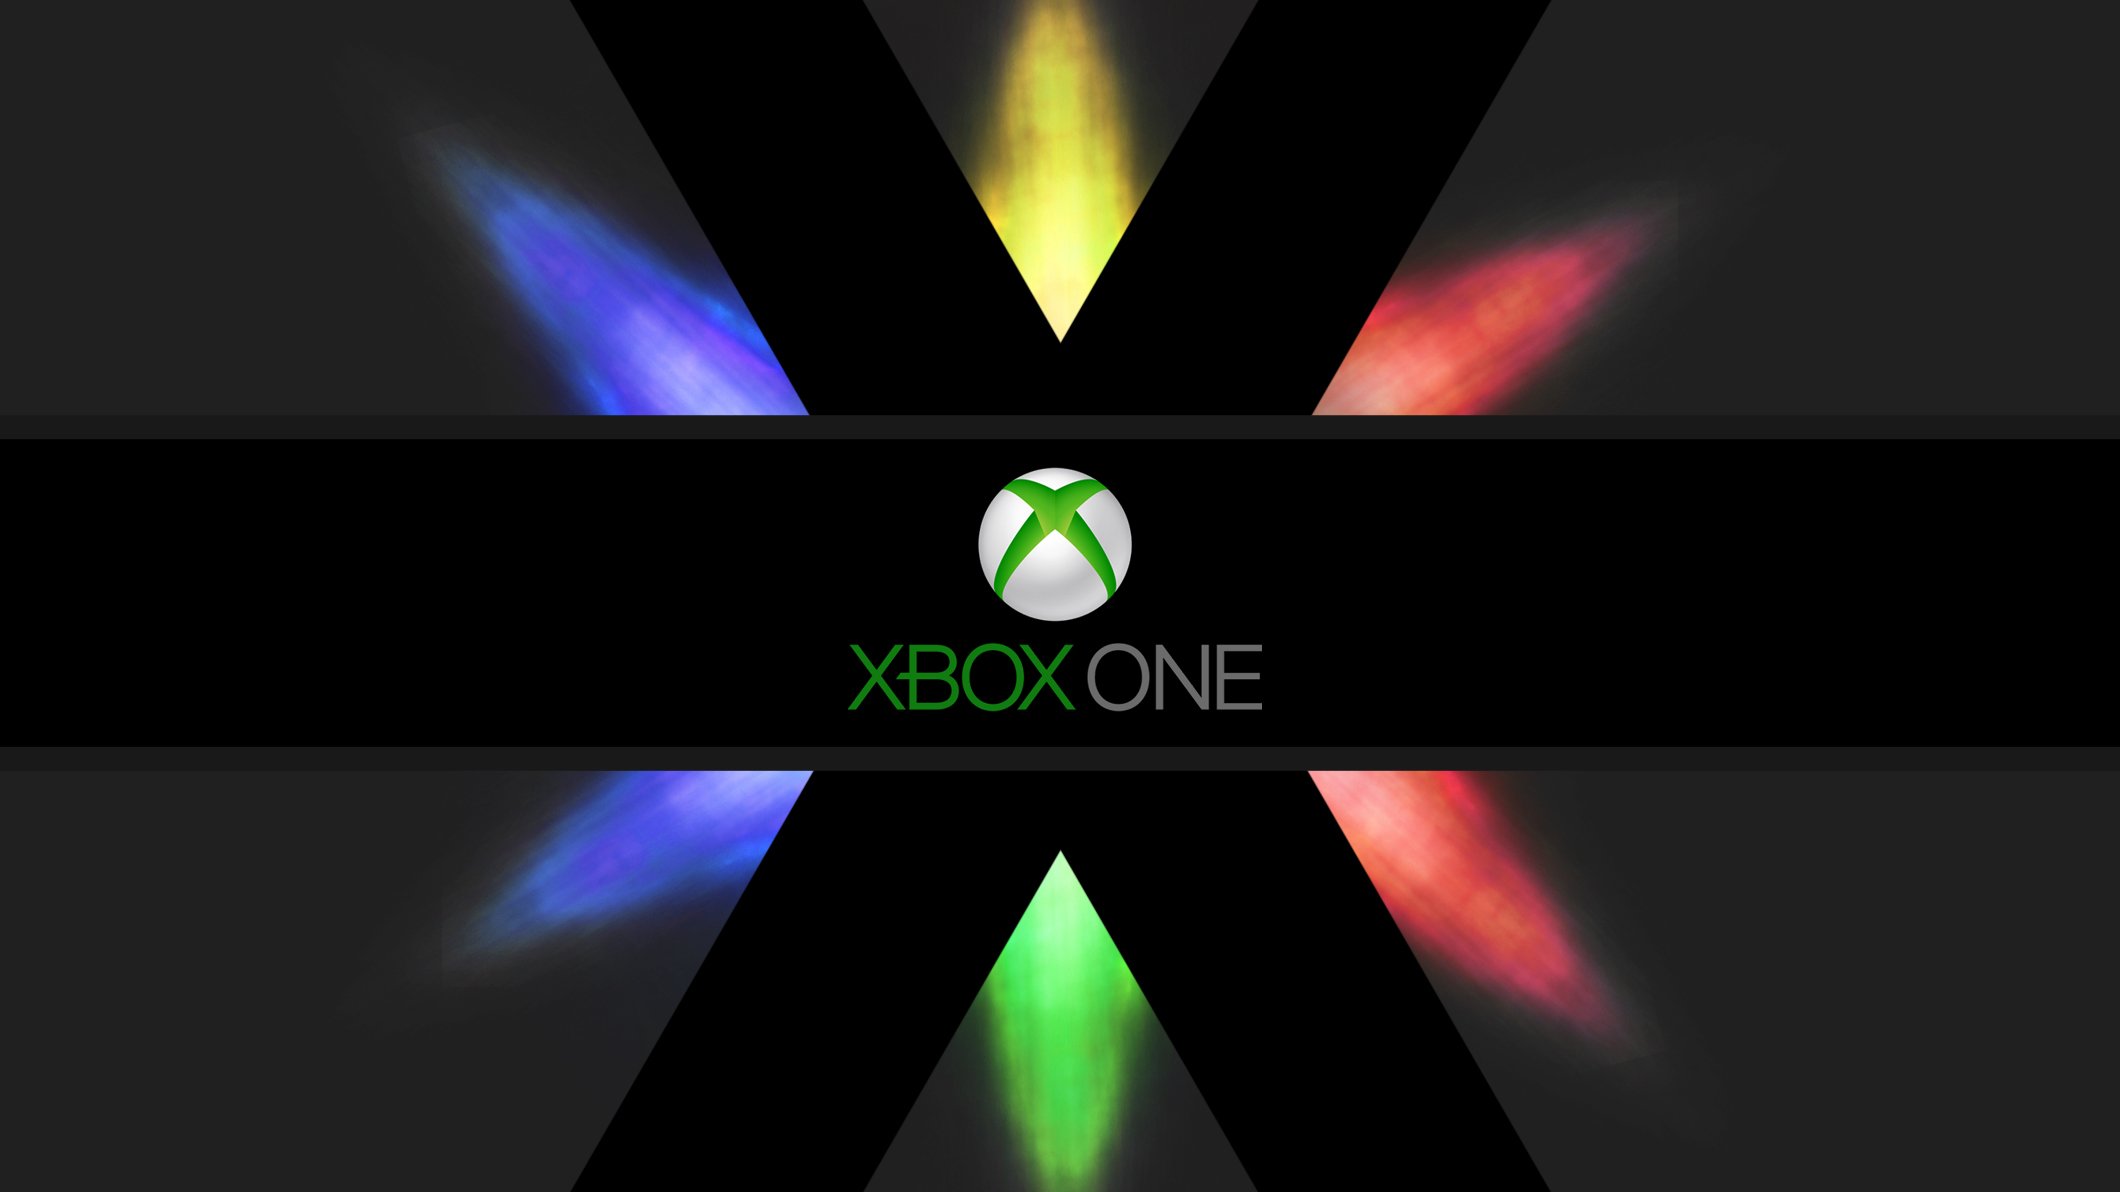 Xbox One Wallpaper, HDQ Beautiful Xbox One Images & Wallpapers